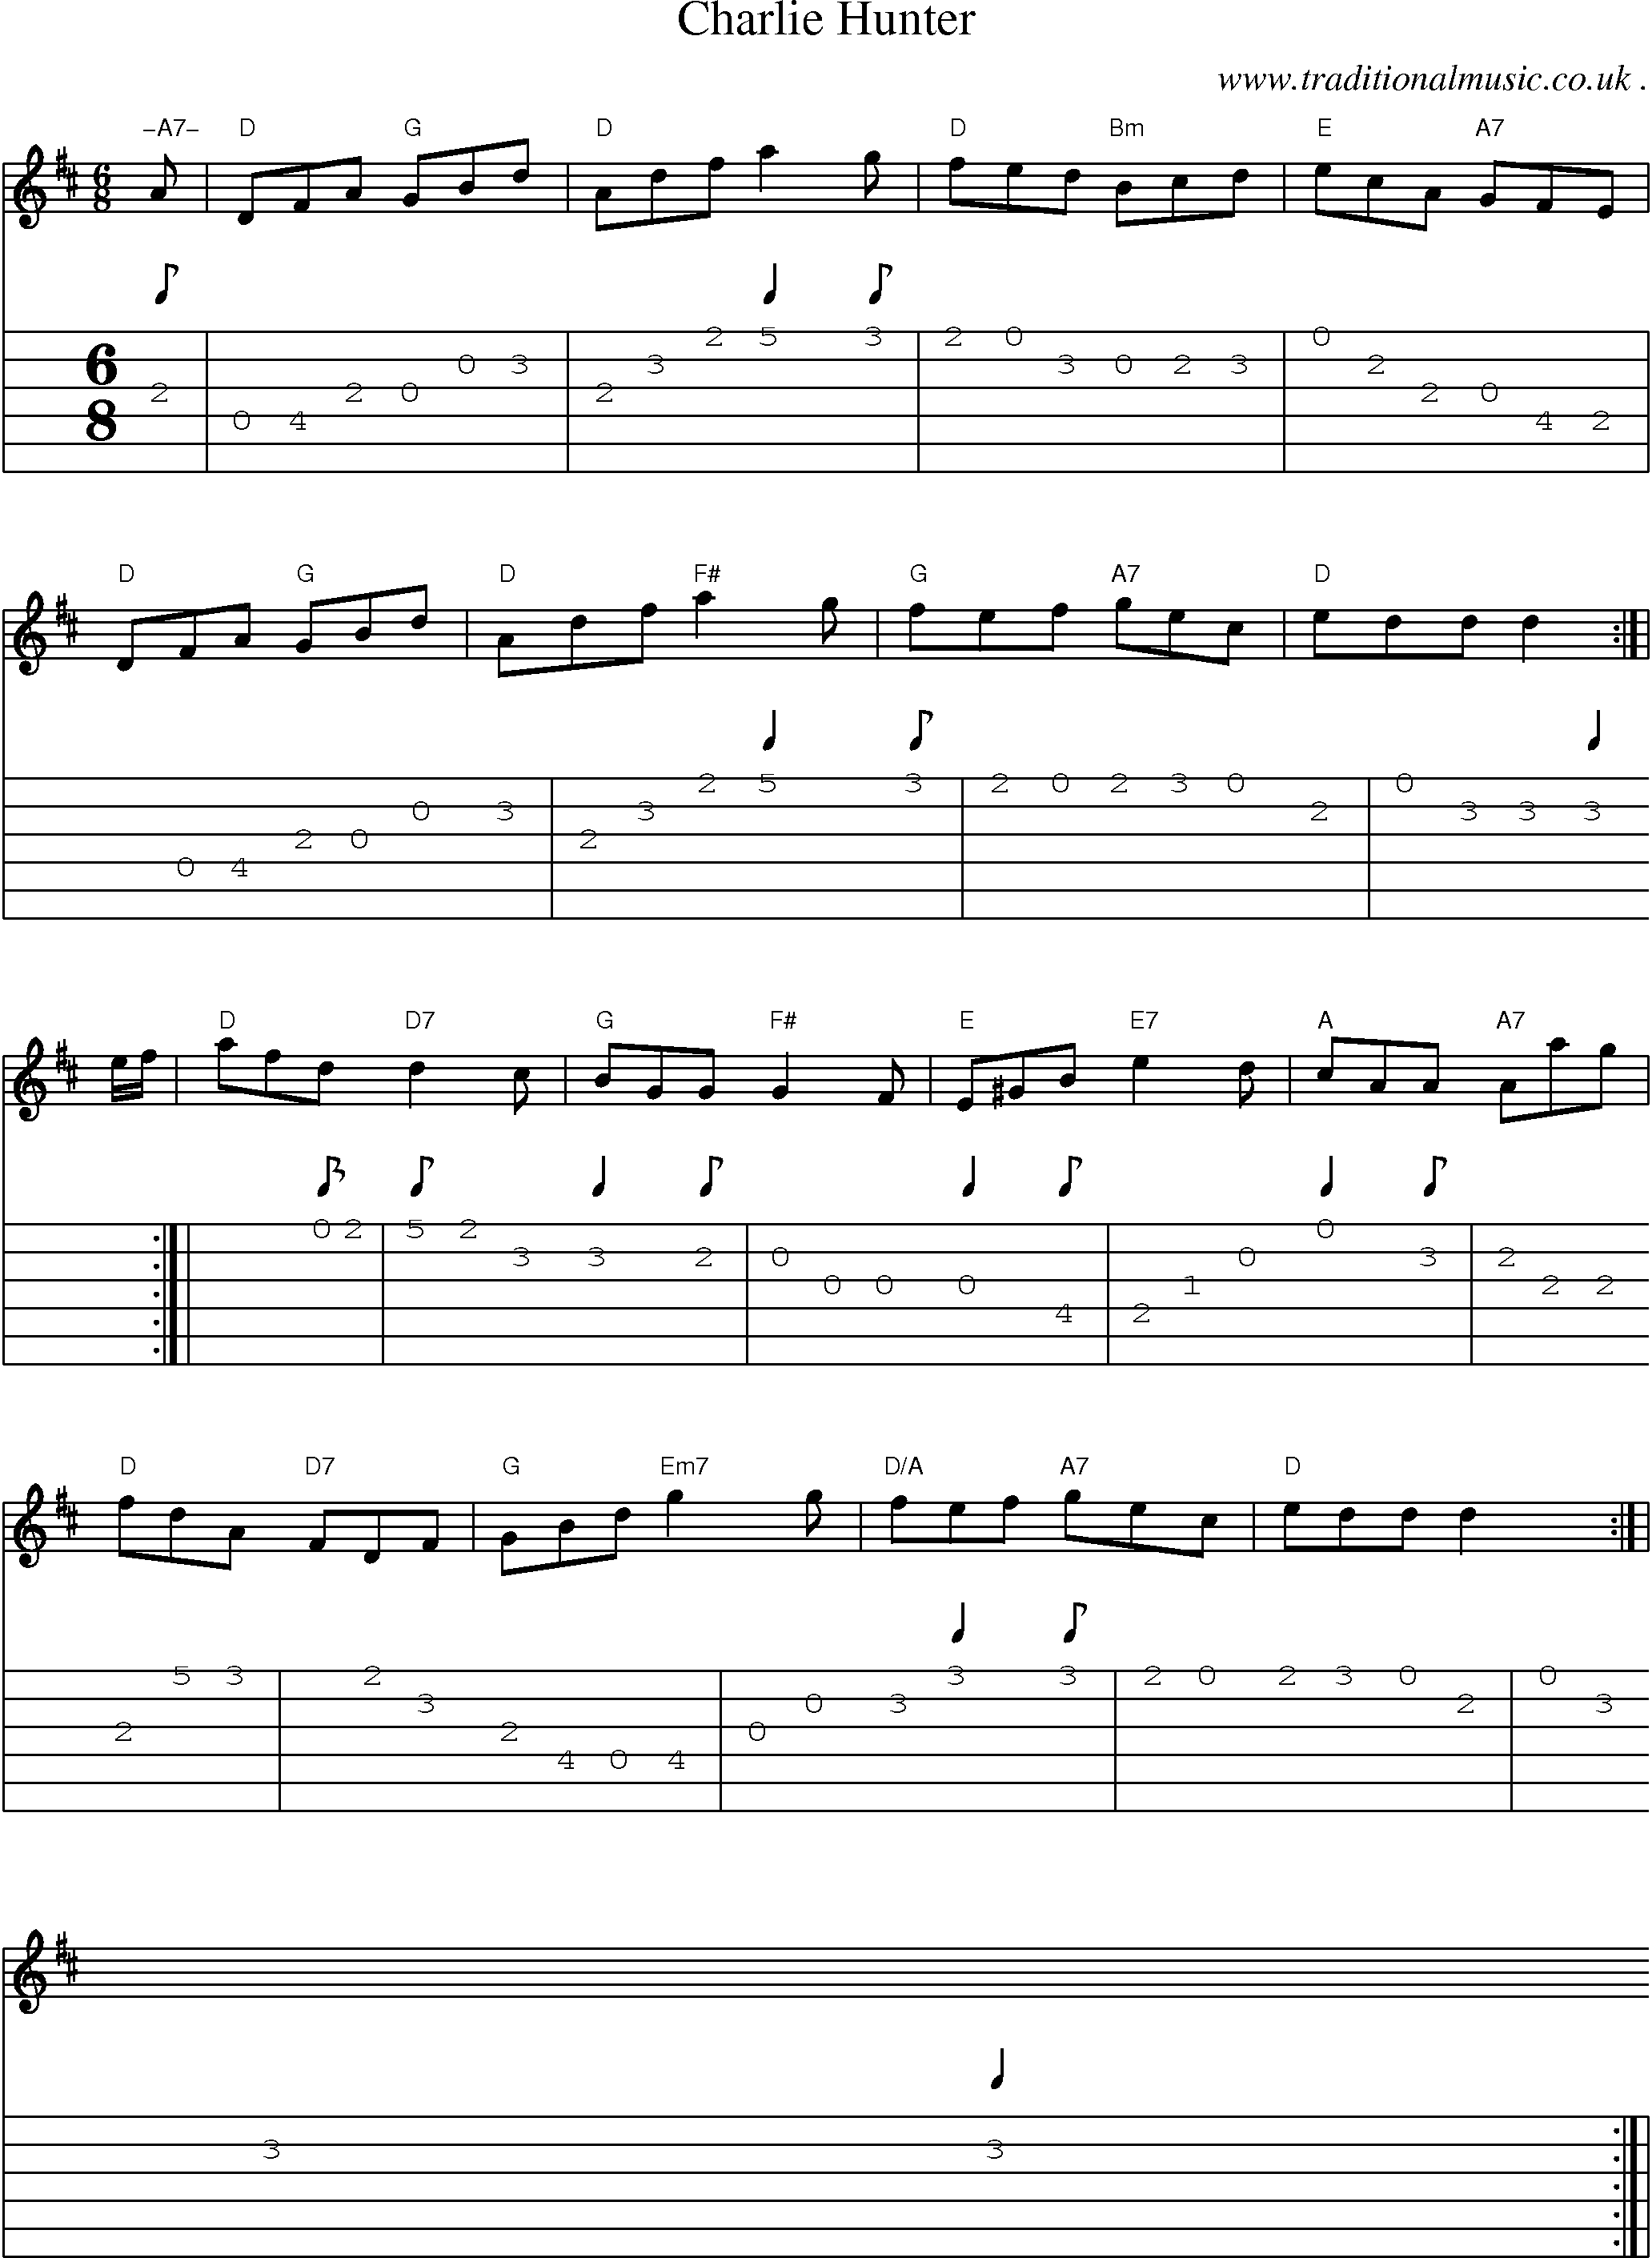 Sheet-music  score, Chords and Guitar Tabs for Charlie Hunter